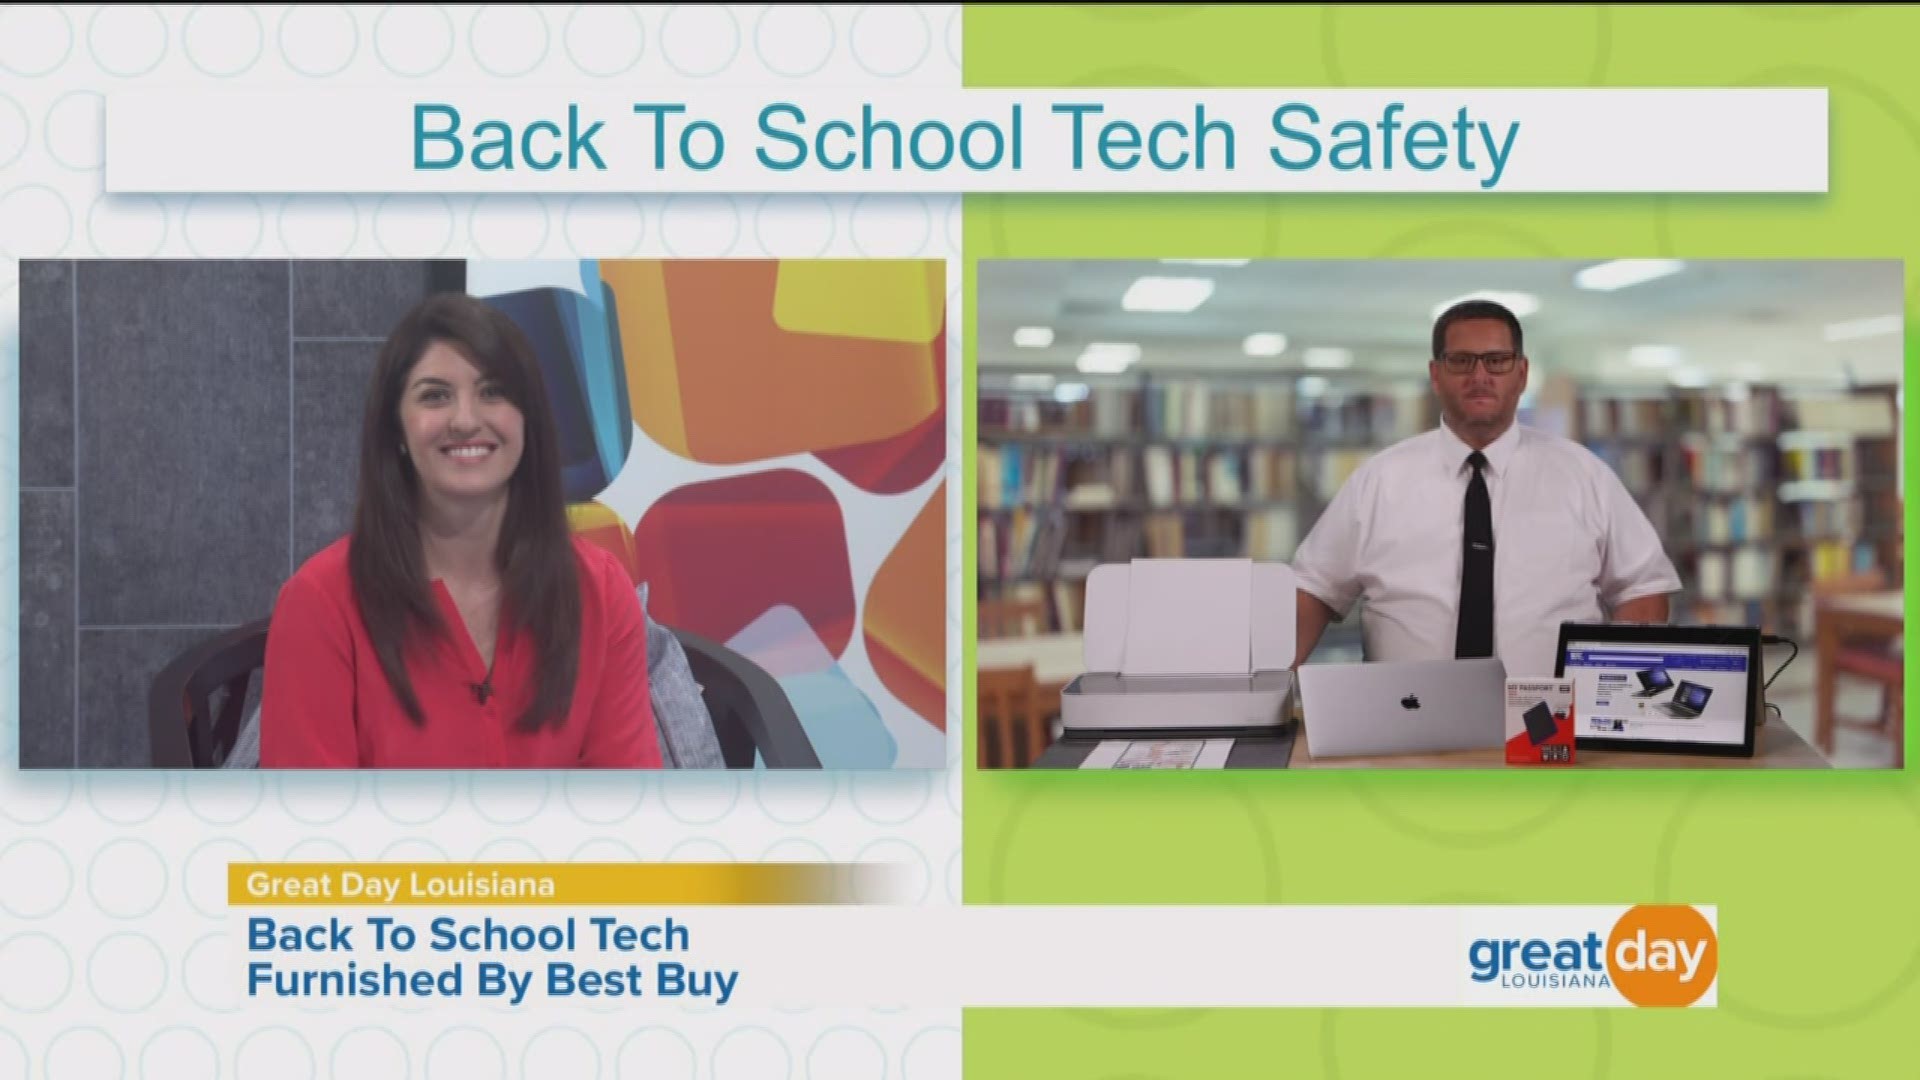 Students today rely on technology more than ever, and as they head back to school they will need guidance on how to operate and take care of their new devices. Here with tips on that and more is Best Buy Geek Squad member and tech expert Derek Meister.